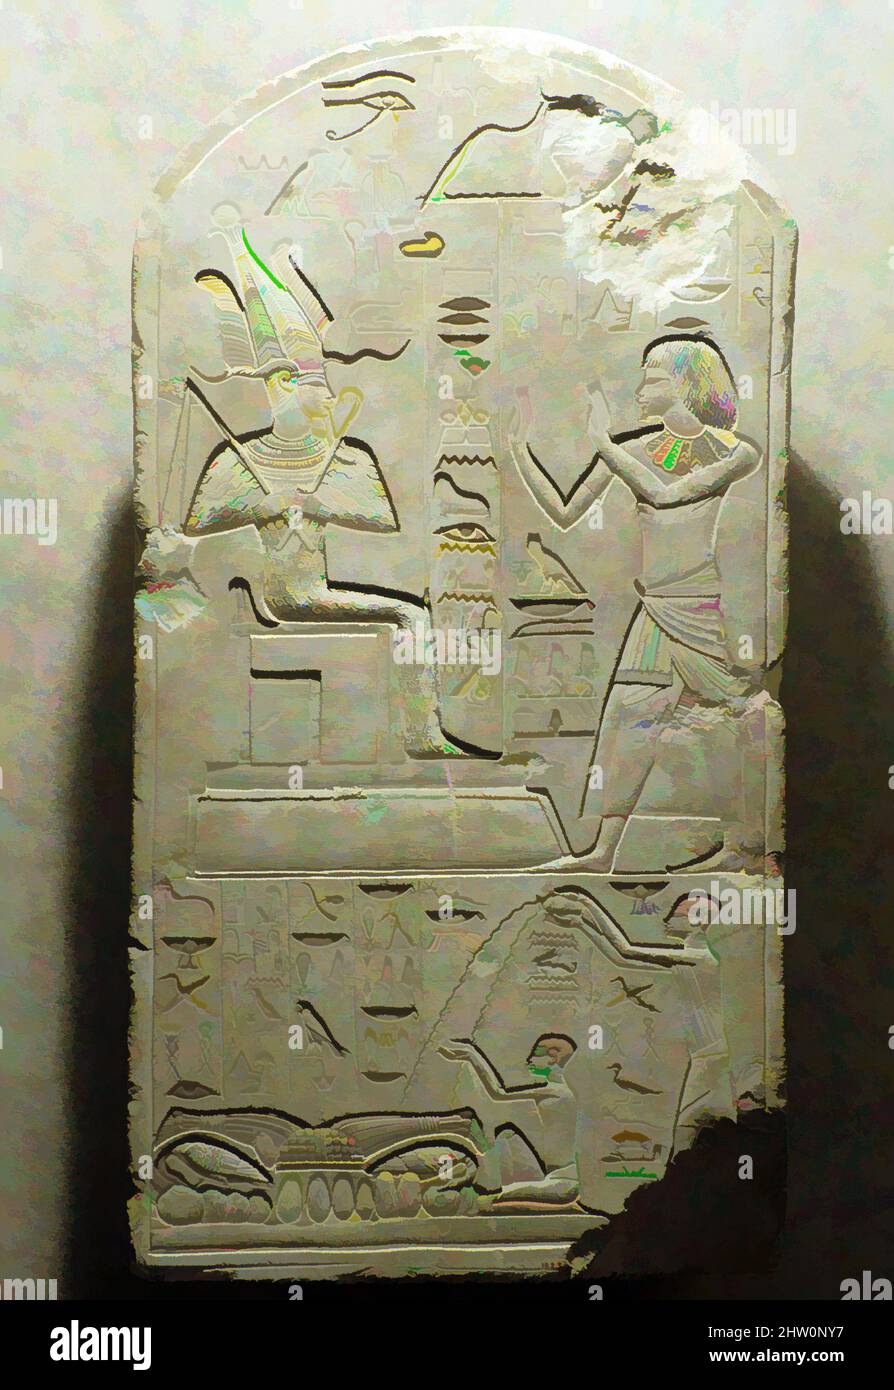 Art inspired by Stela of Senu Adoring Osiris, New Kingdom, Dynasty 18, ca. 1390–1352 B.C., From Egypt; Probably from Middle Egypt, Tuna el-Gebel, Limestone, H. 62.5 cm (24 5/8 in), This stela depicts the royal scribe Senu adoring the god Osiris, ruler of the underworld. Below, Senu's, Classic works modernized by Artotop with a splash of modernity. Shapes, color and value, eye-catching visual impact on art. Emotions through freedom of artworks in a contemporary way. A timeless message pursuing a wildly creative new direction. Artists turning to the digital medium and creating the Artotop NFT Stock Photo